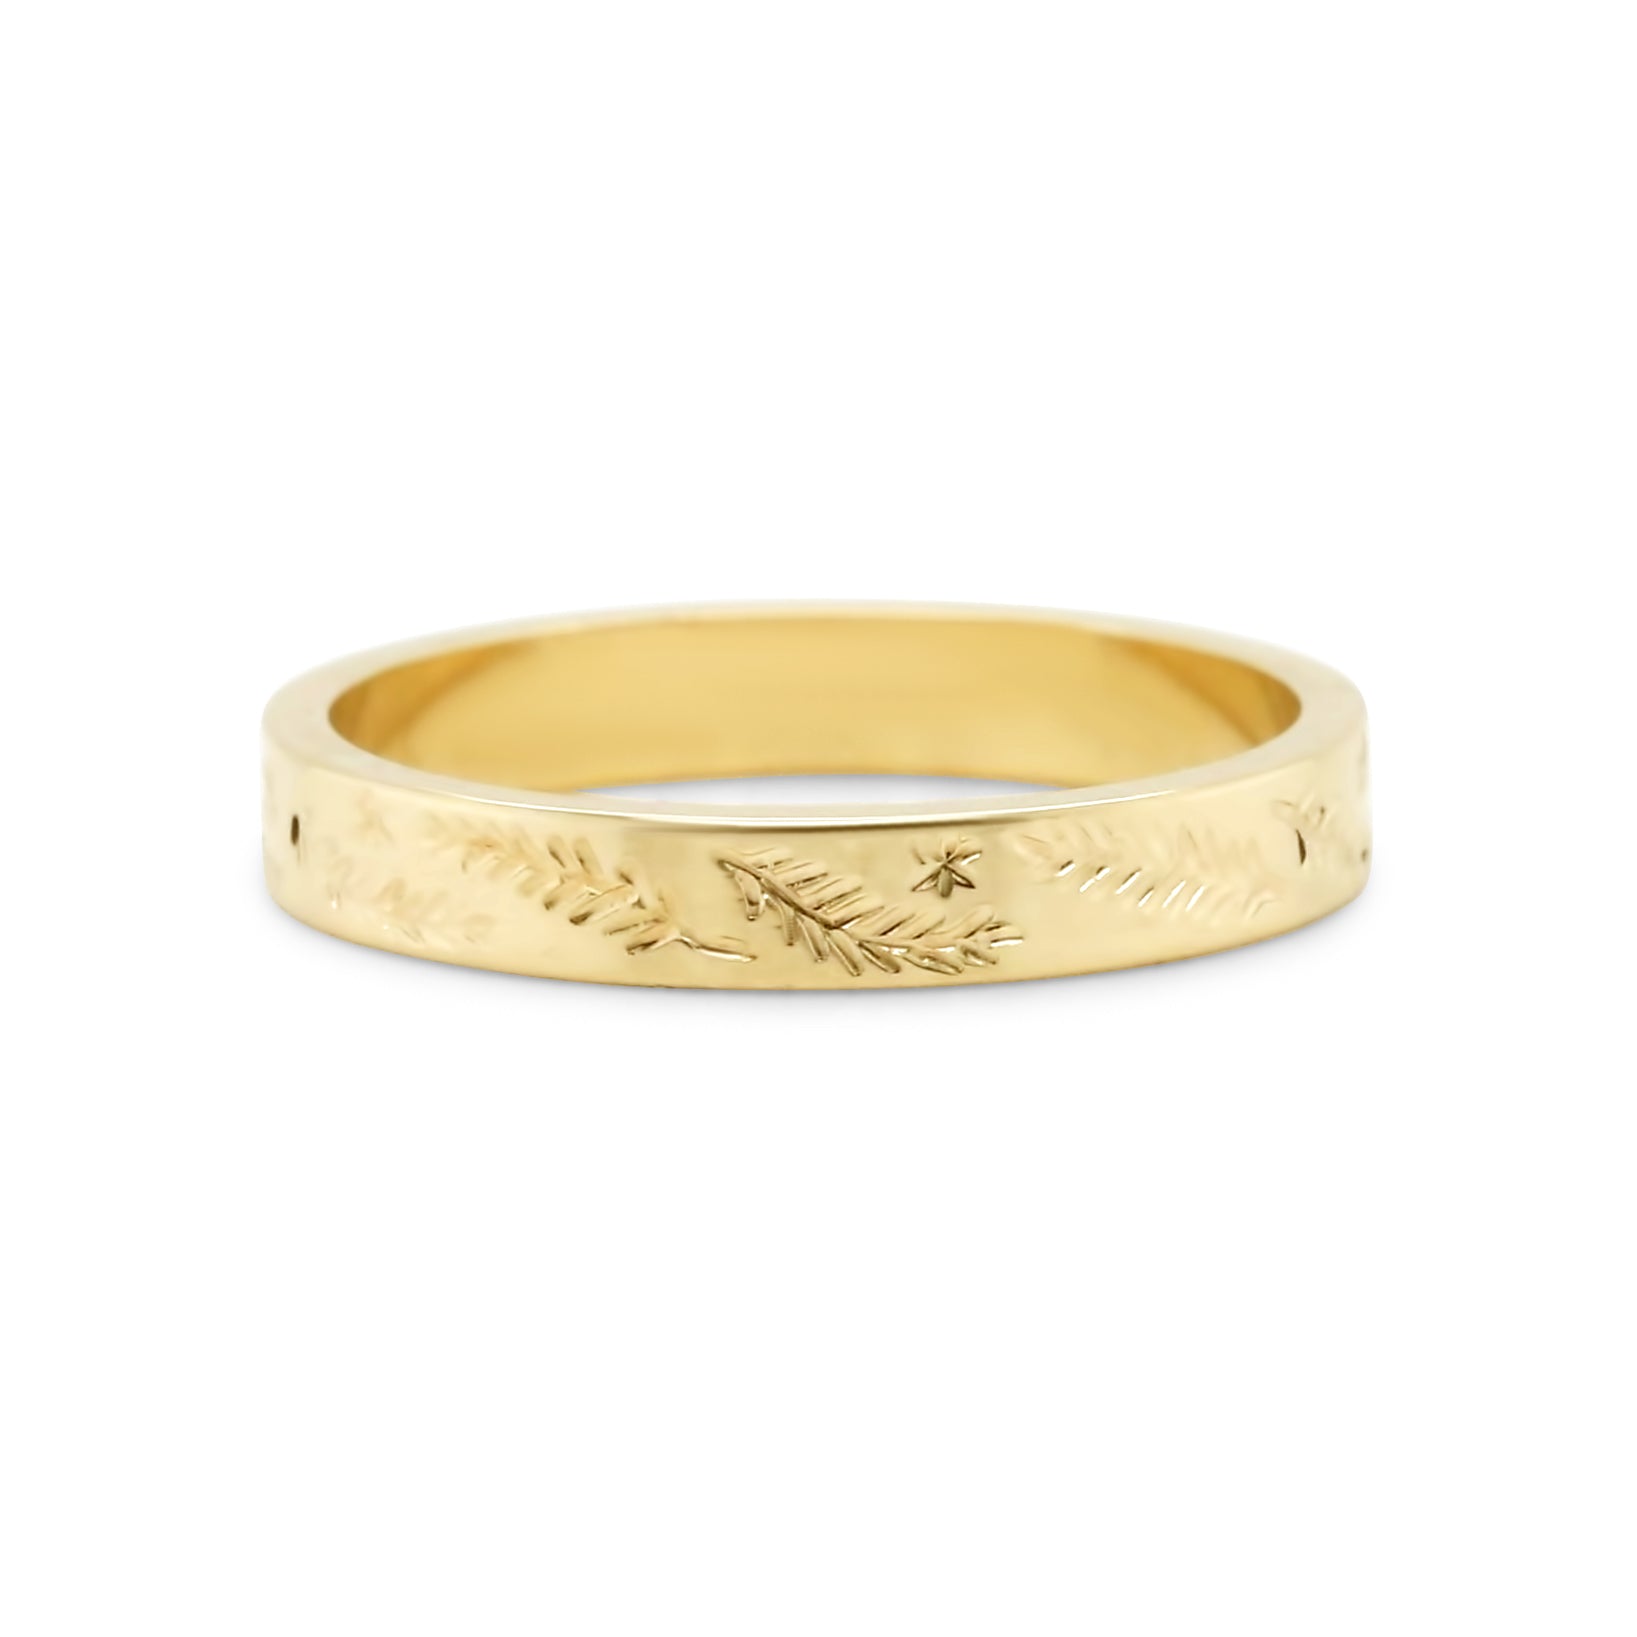 14k yellow gold white gold leafy hand engraved ring band gender neutral